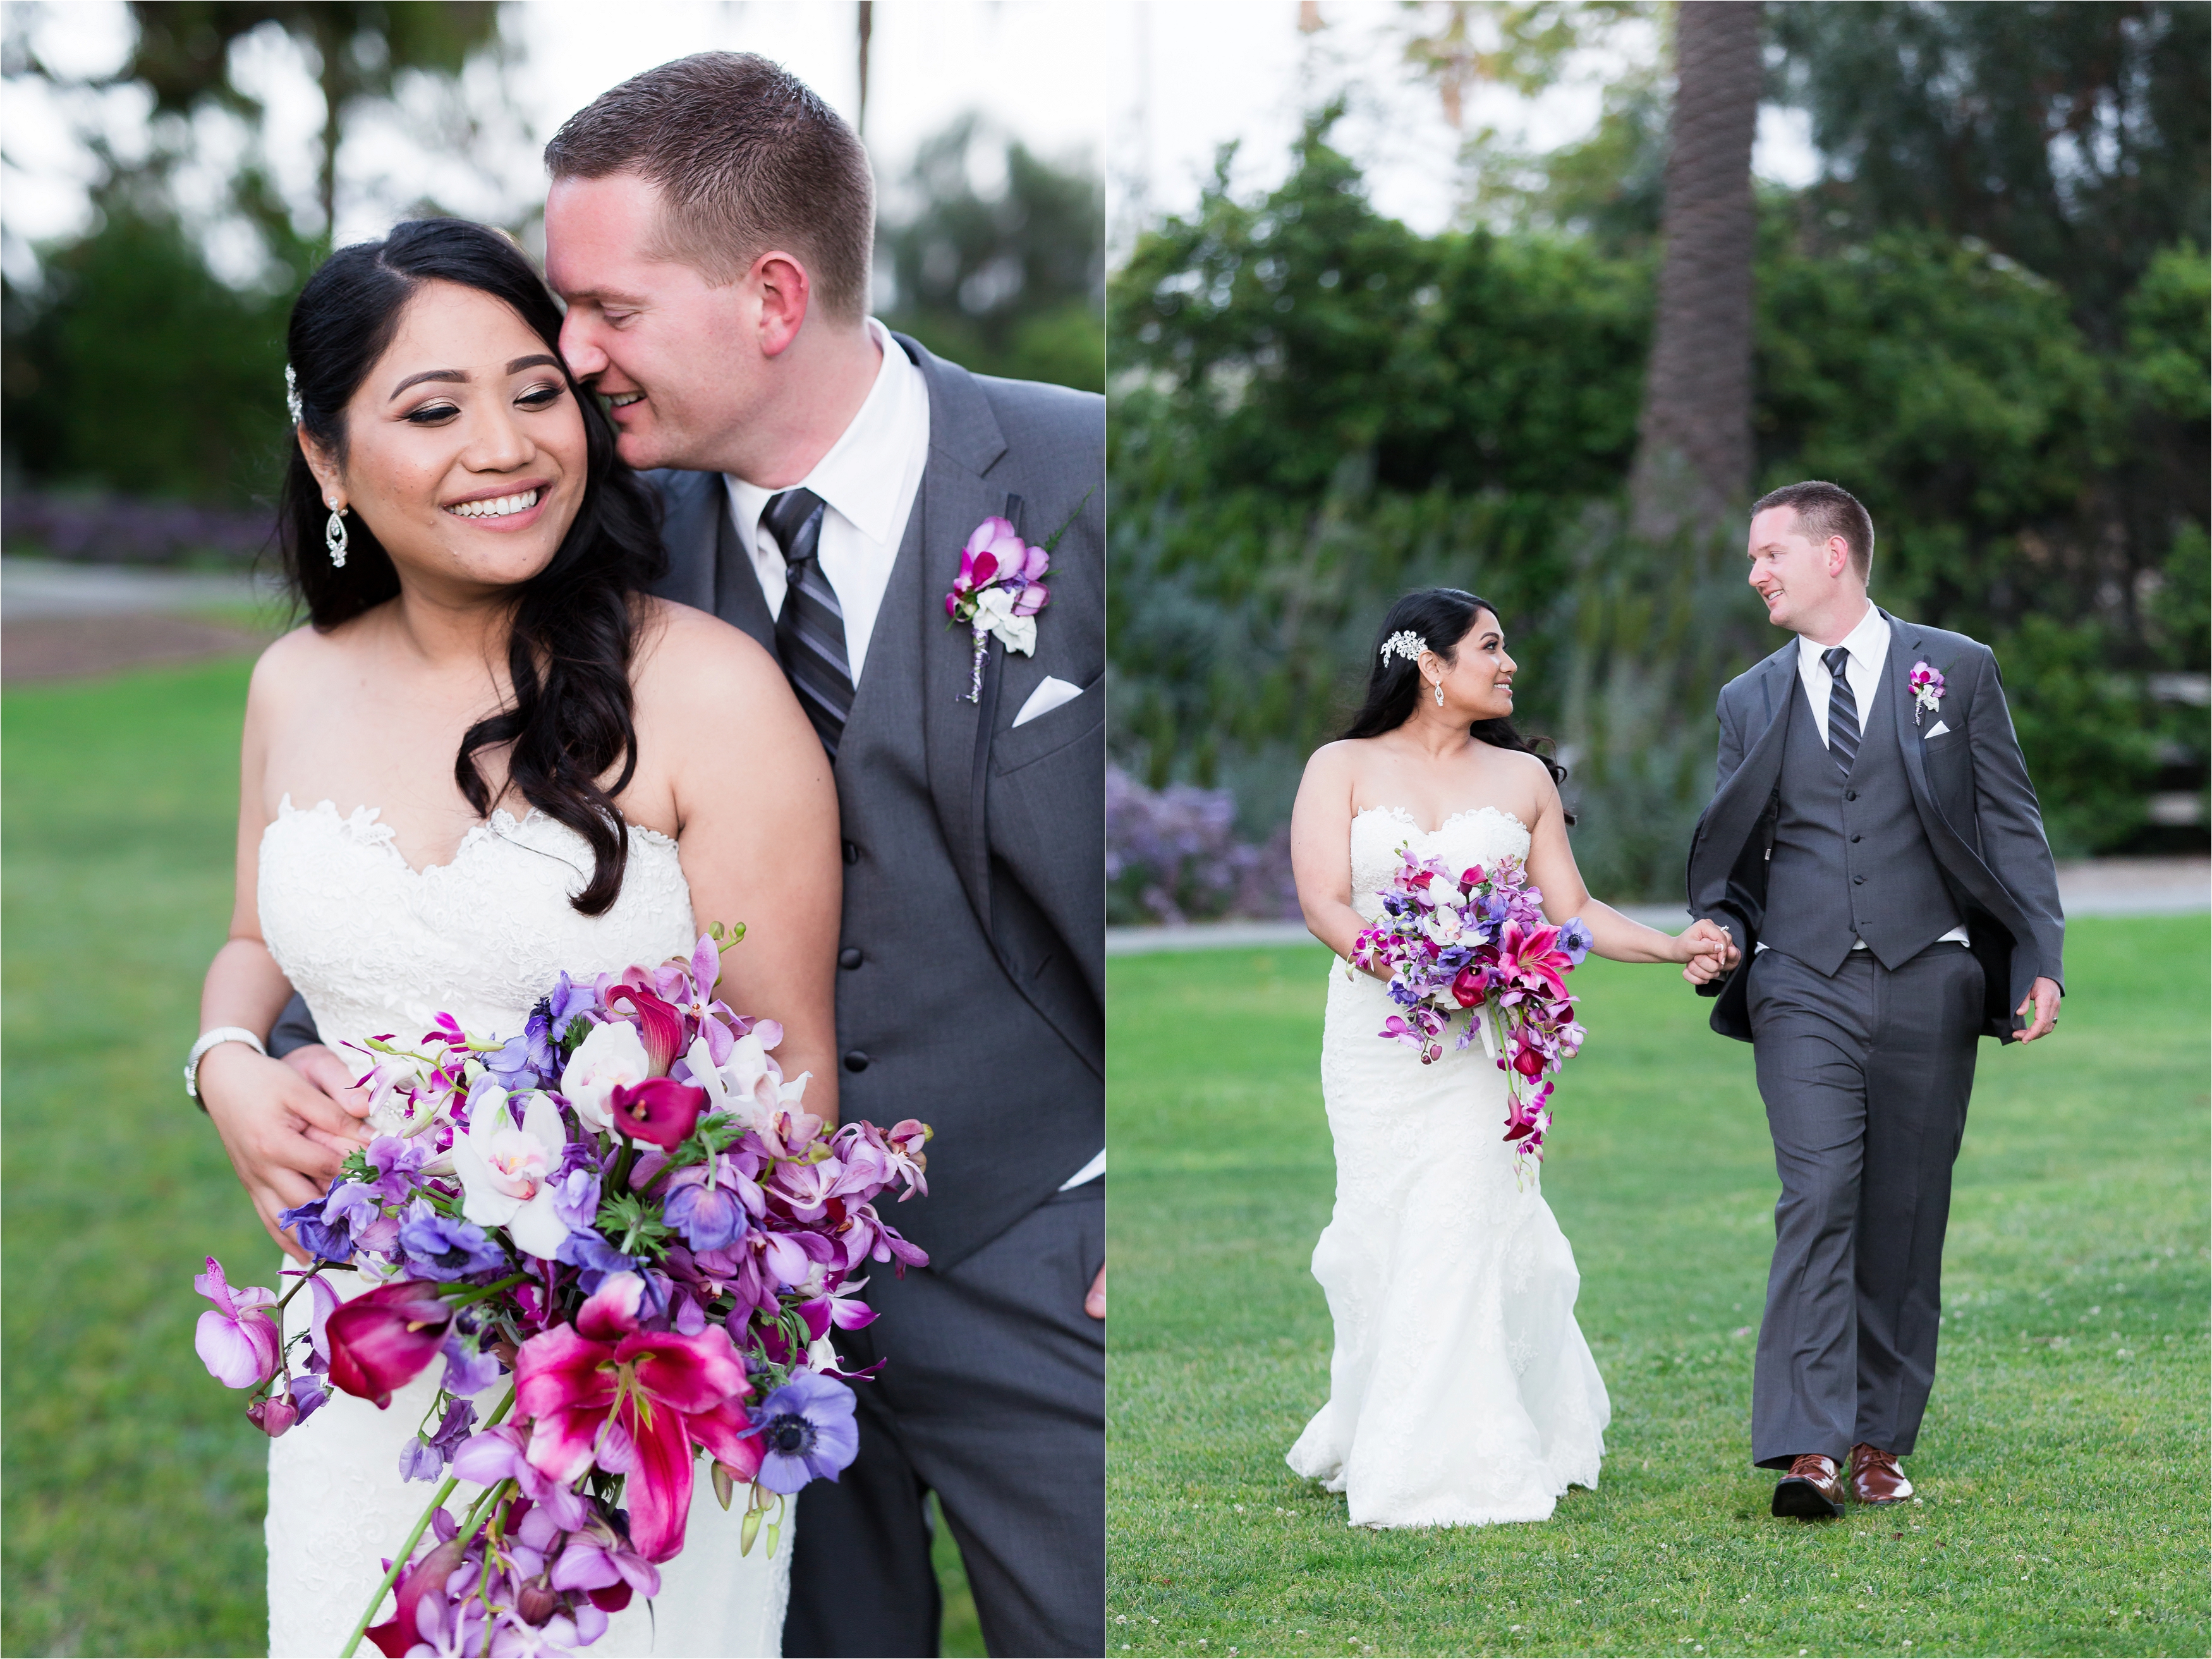 Wedding couple smiling sweetly at each other on grass